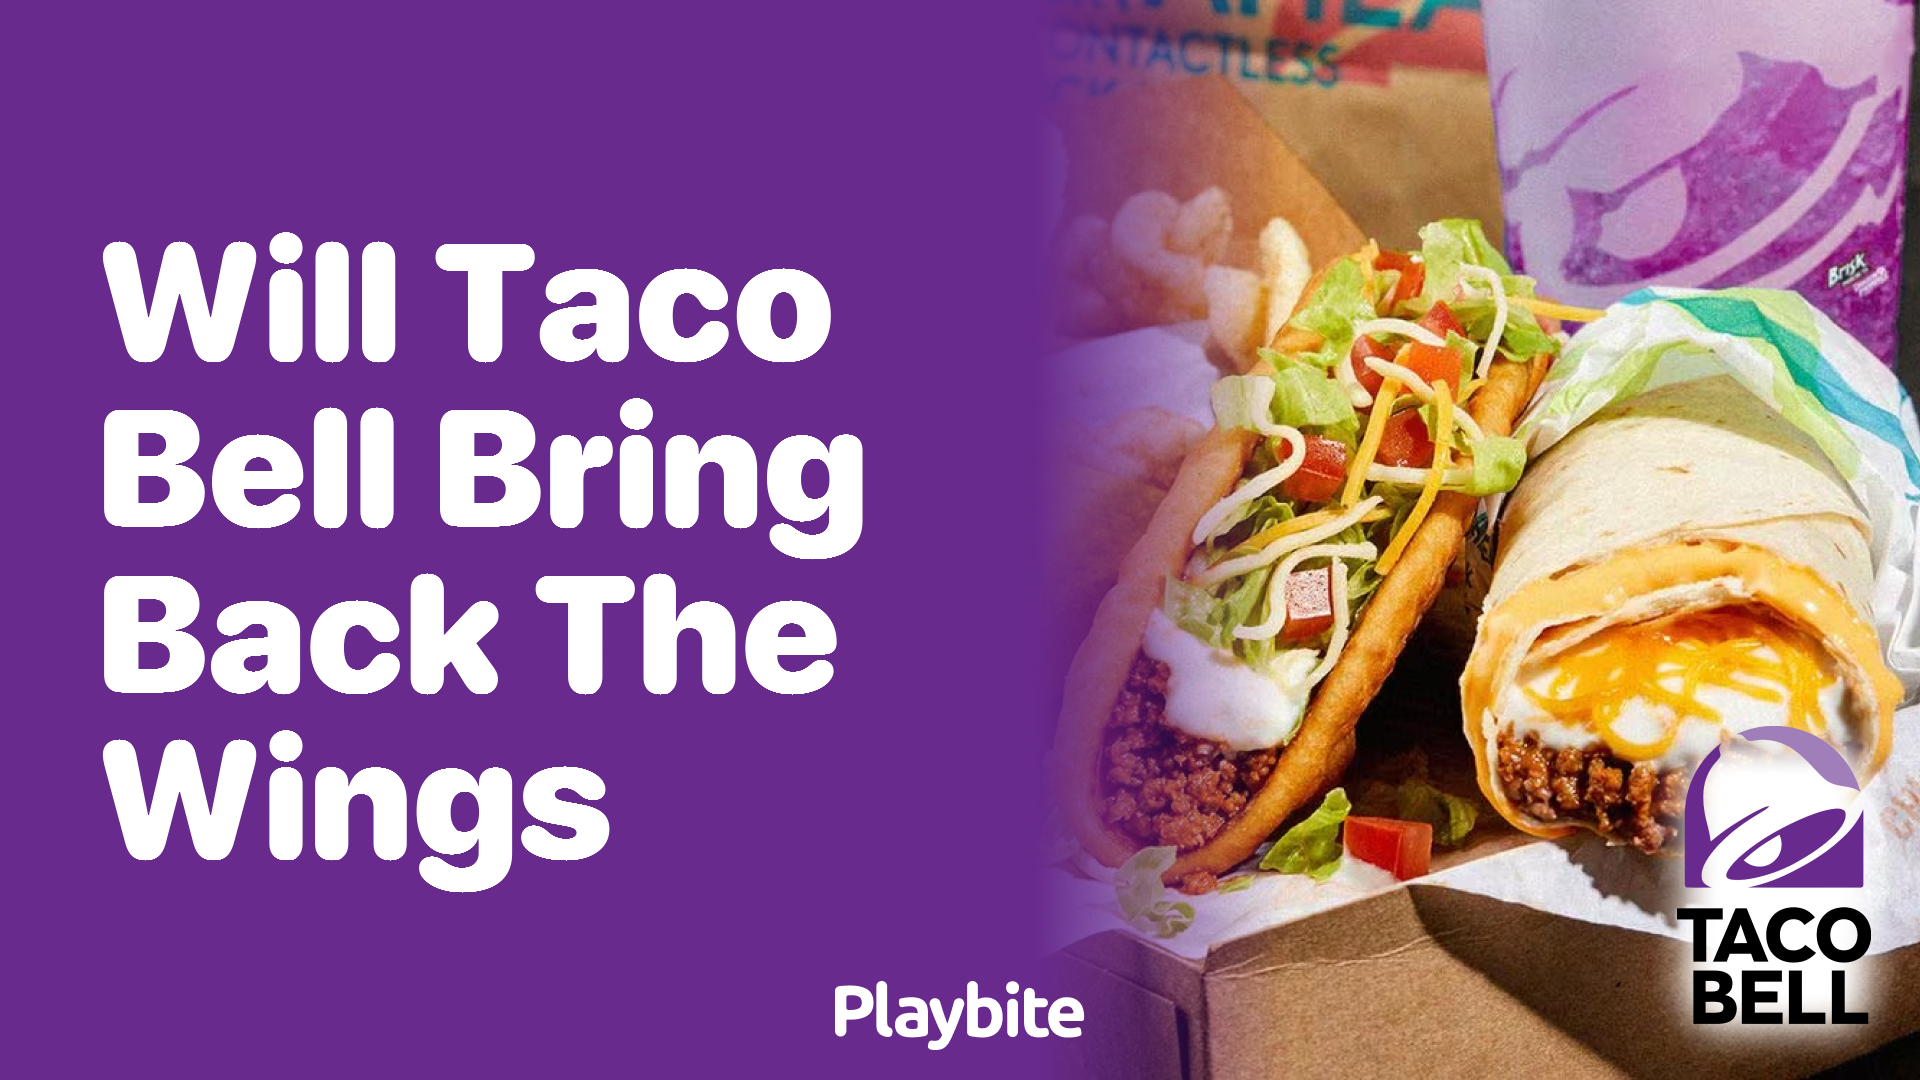 Will Taco Bell Bring Back the Wings? A Look into the Future of Your Favorite Snack